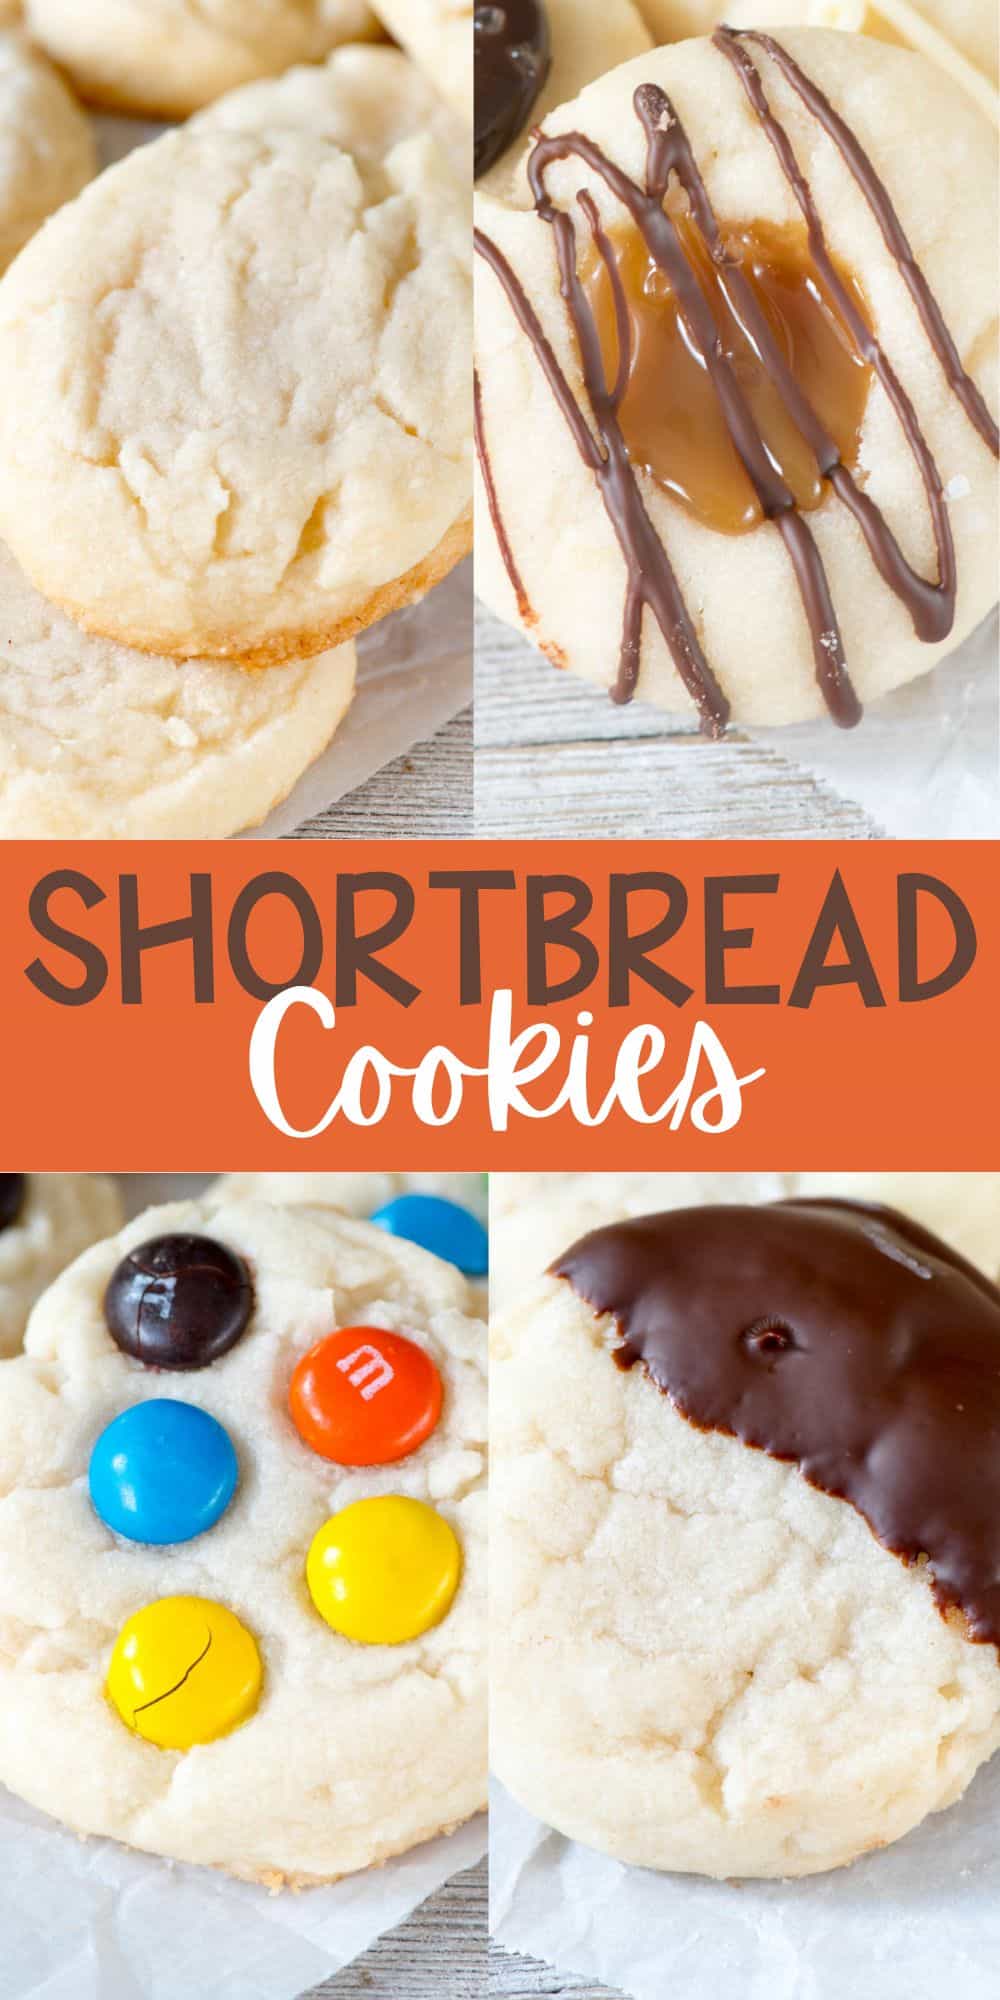 four photos of different shortbread flavors laid out together with words on the image.